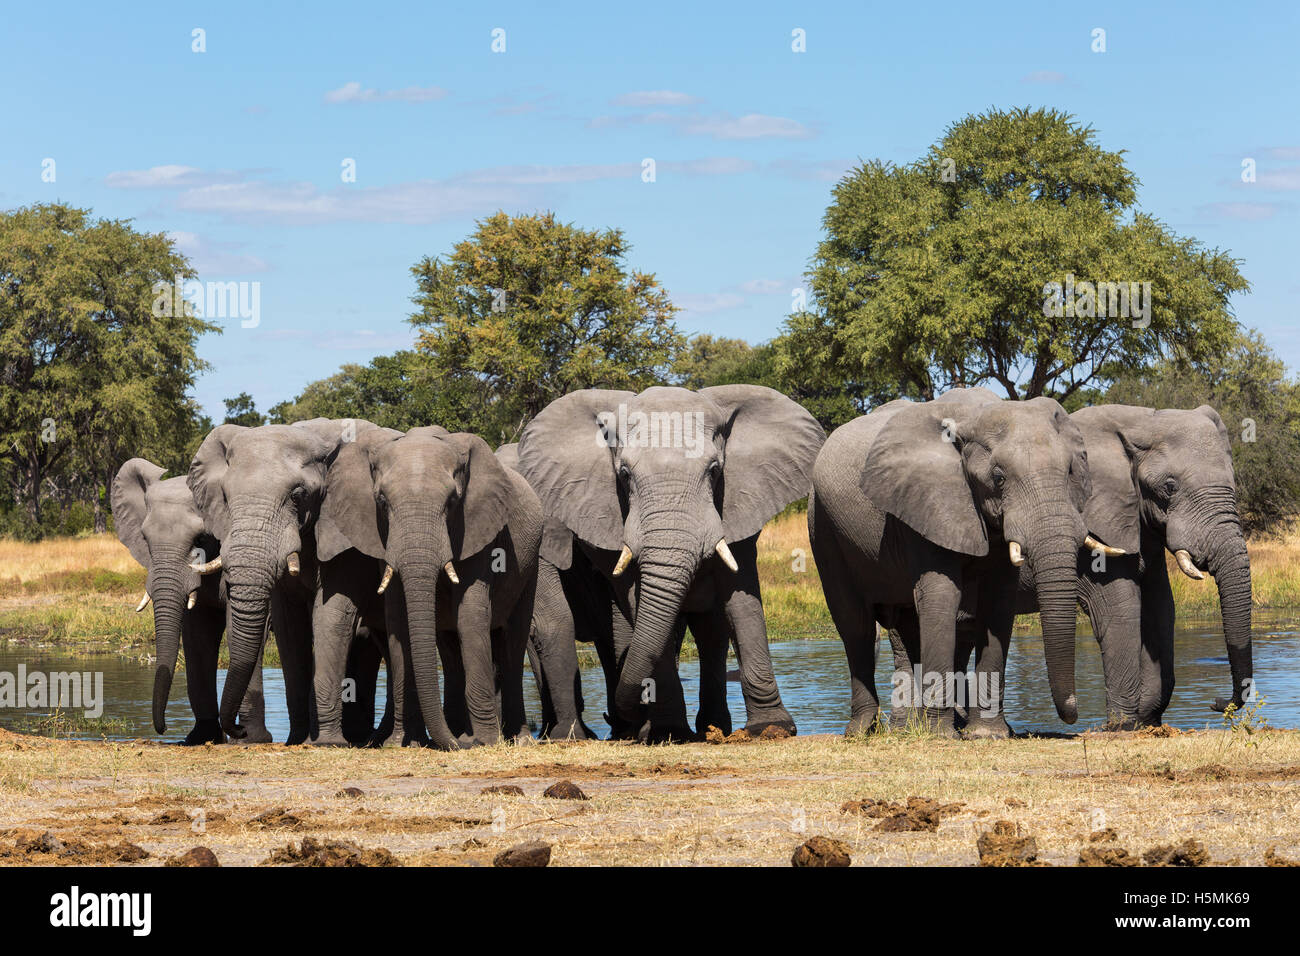 A tight cluster of six elephant (Loxodonta africana) bulls standing close together Stock Photo